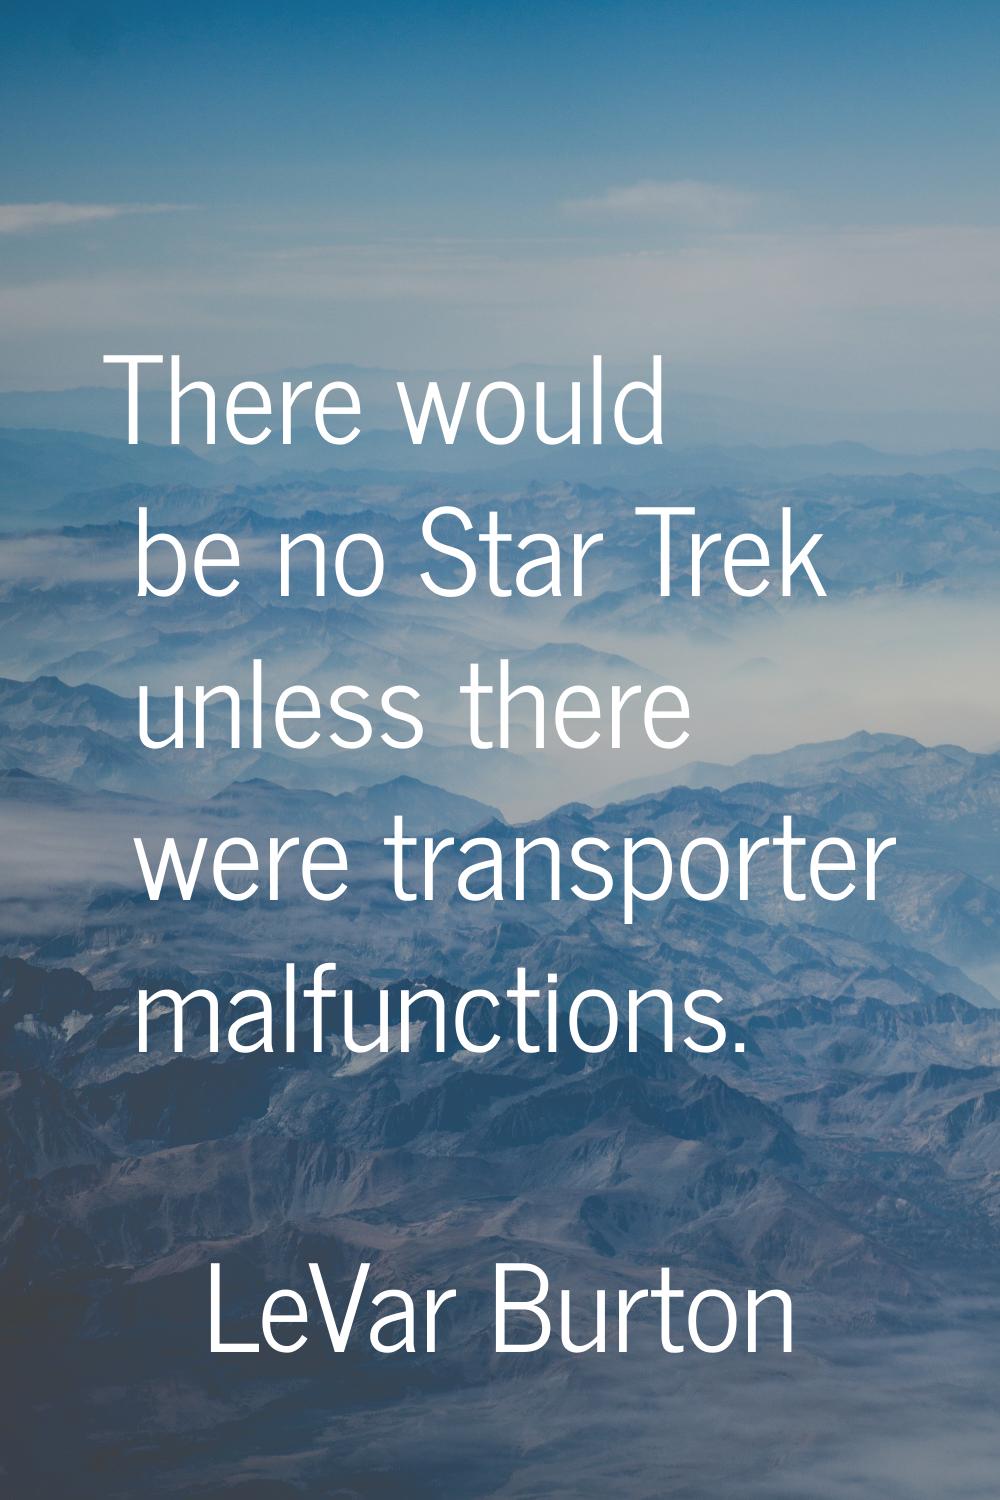 There would be no Star Trek unless there were transporter malfunctions.